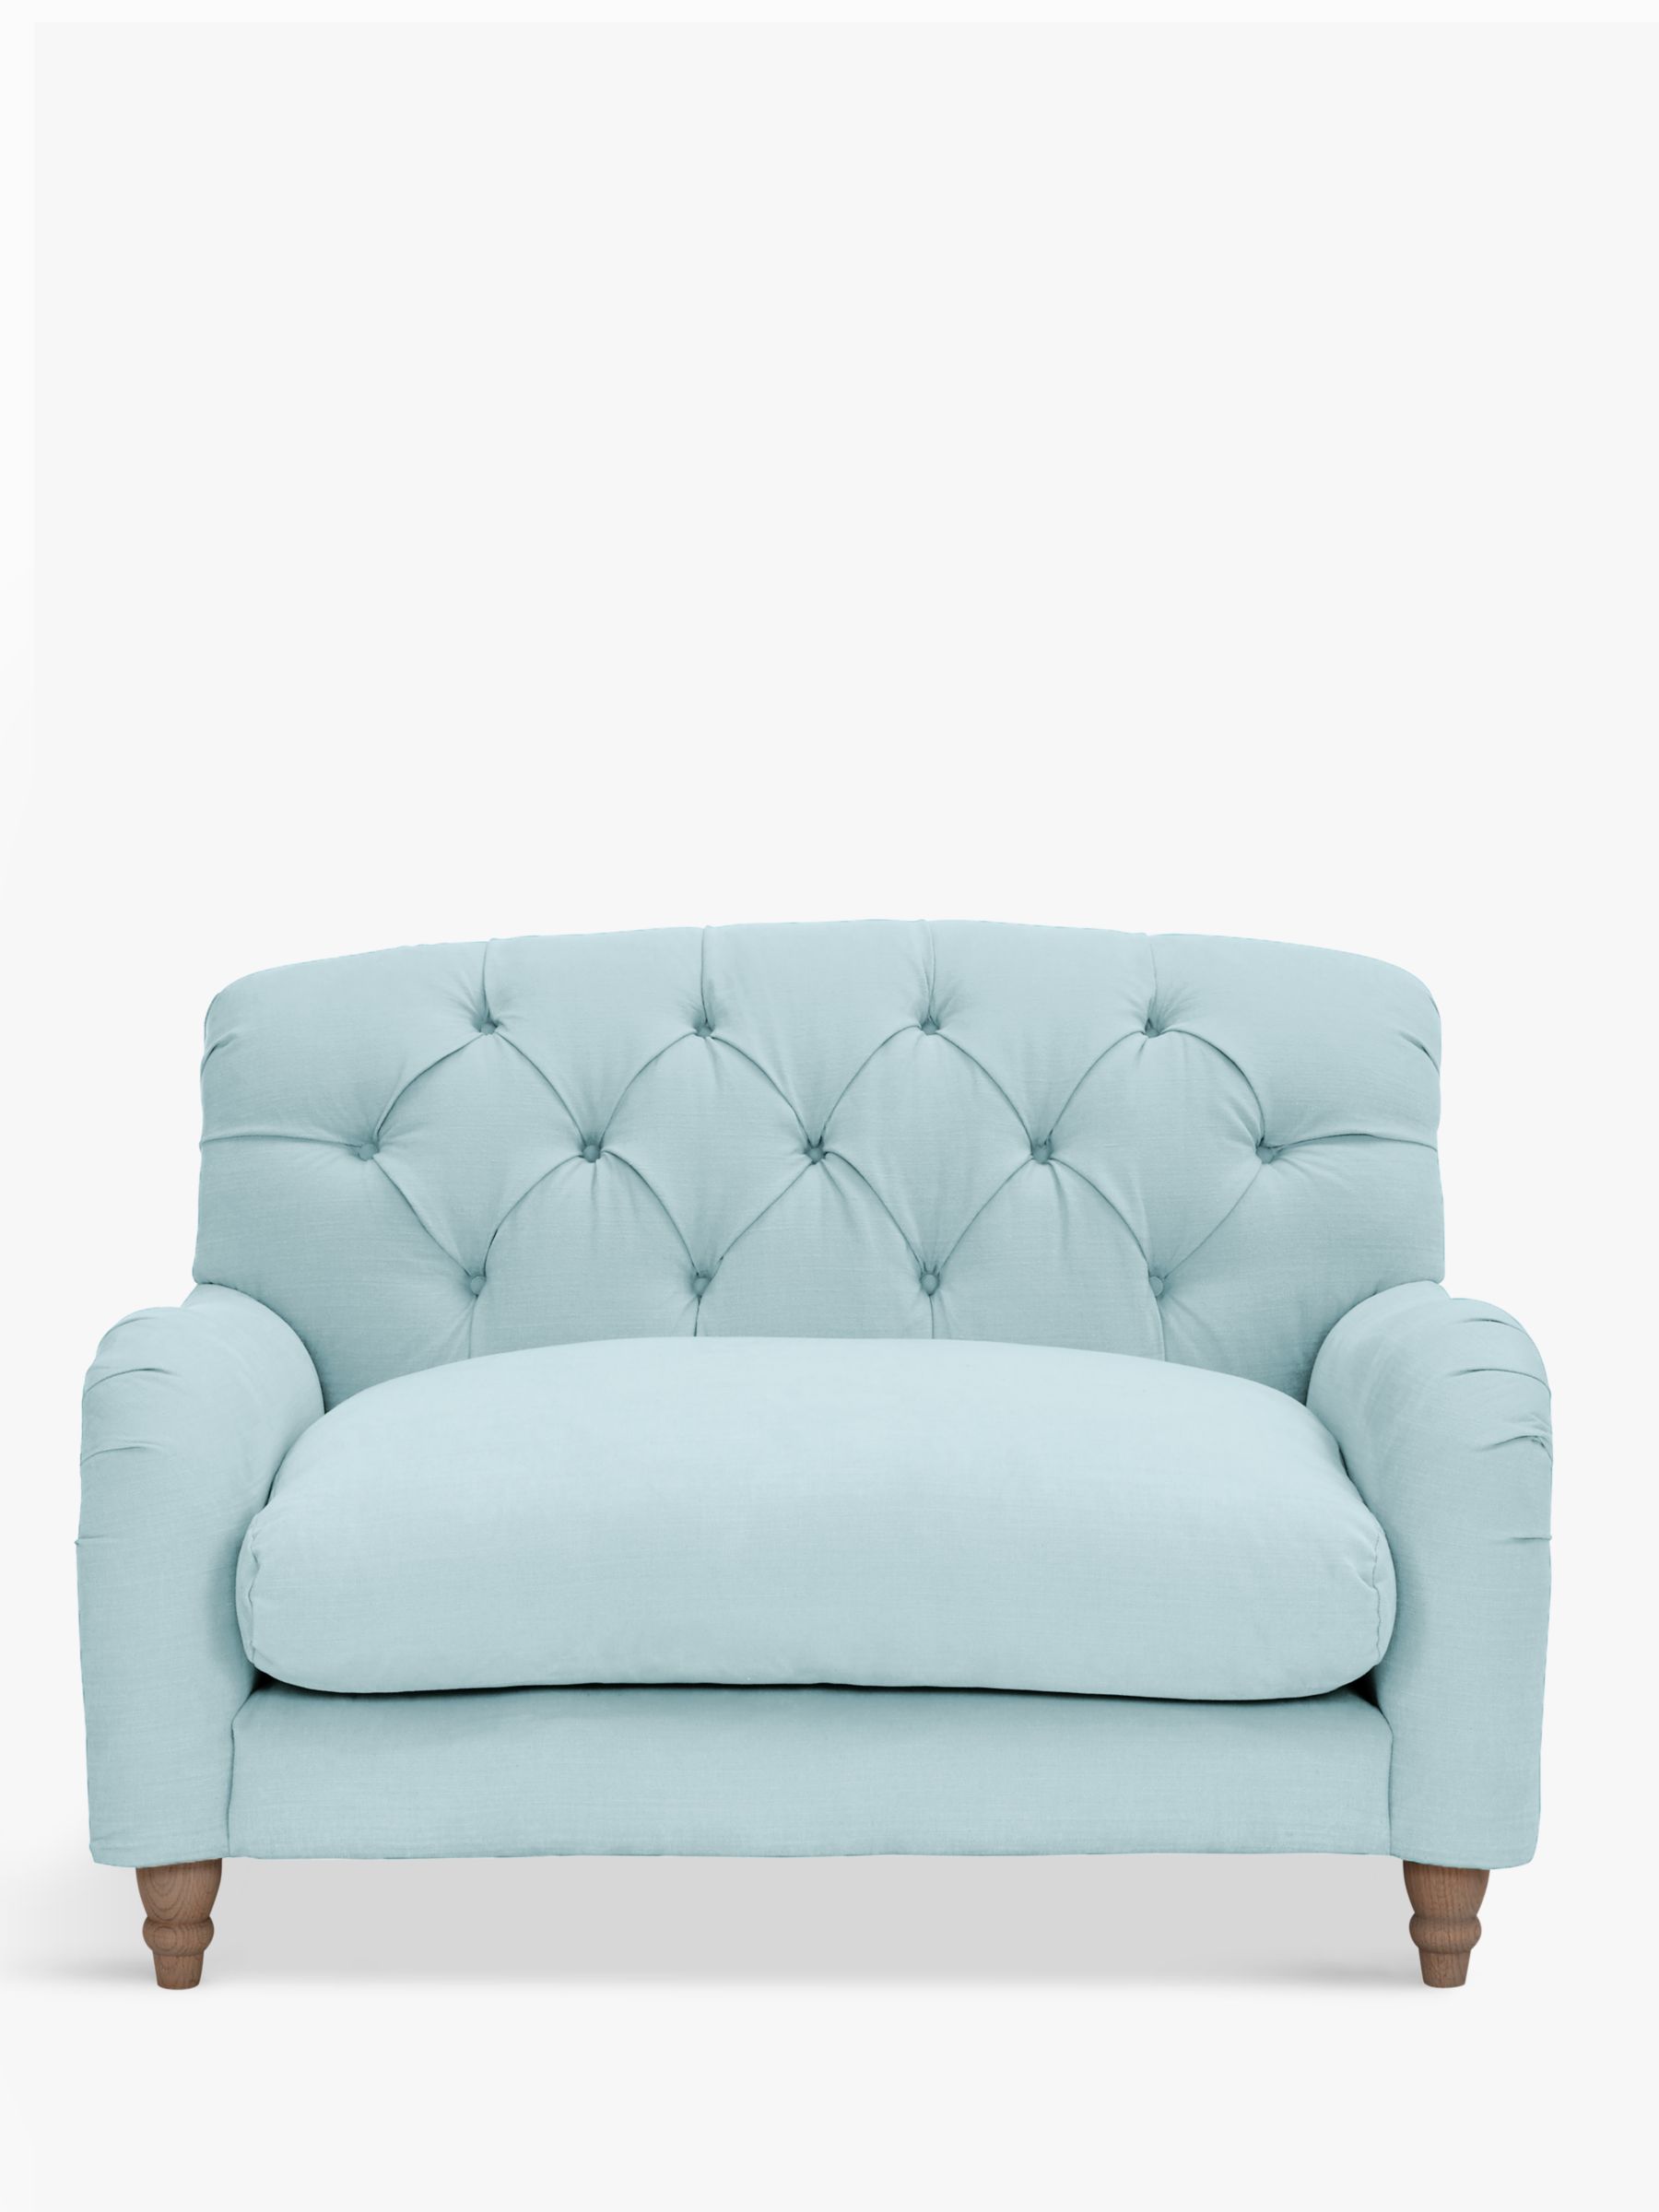 Crumble Snuggler by Loaf at John Lewis, Clever Softie Powder Blue